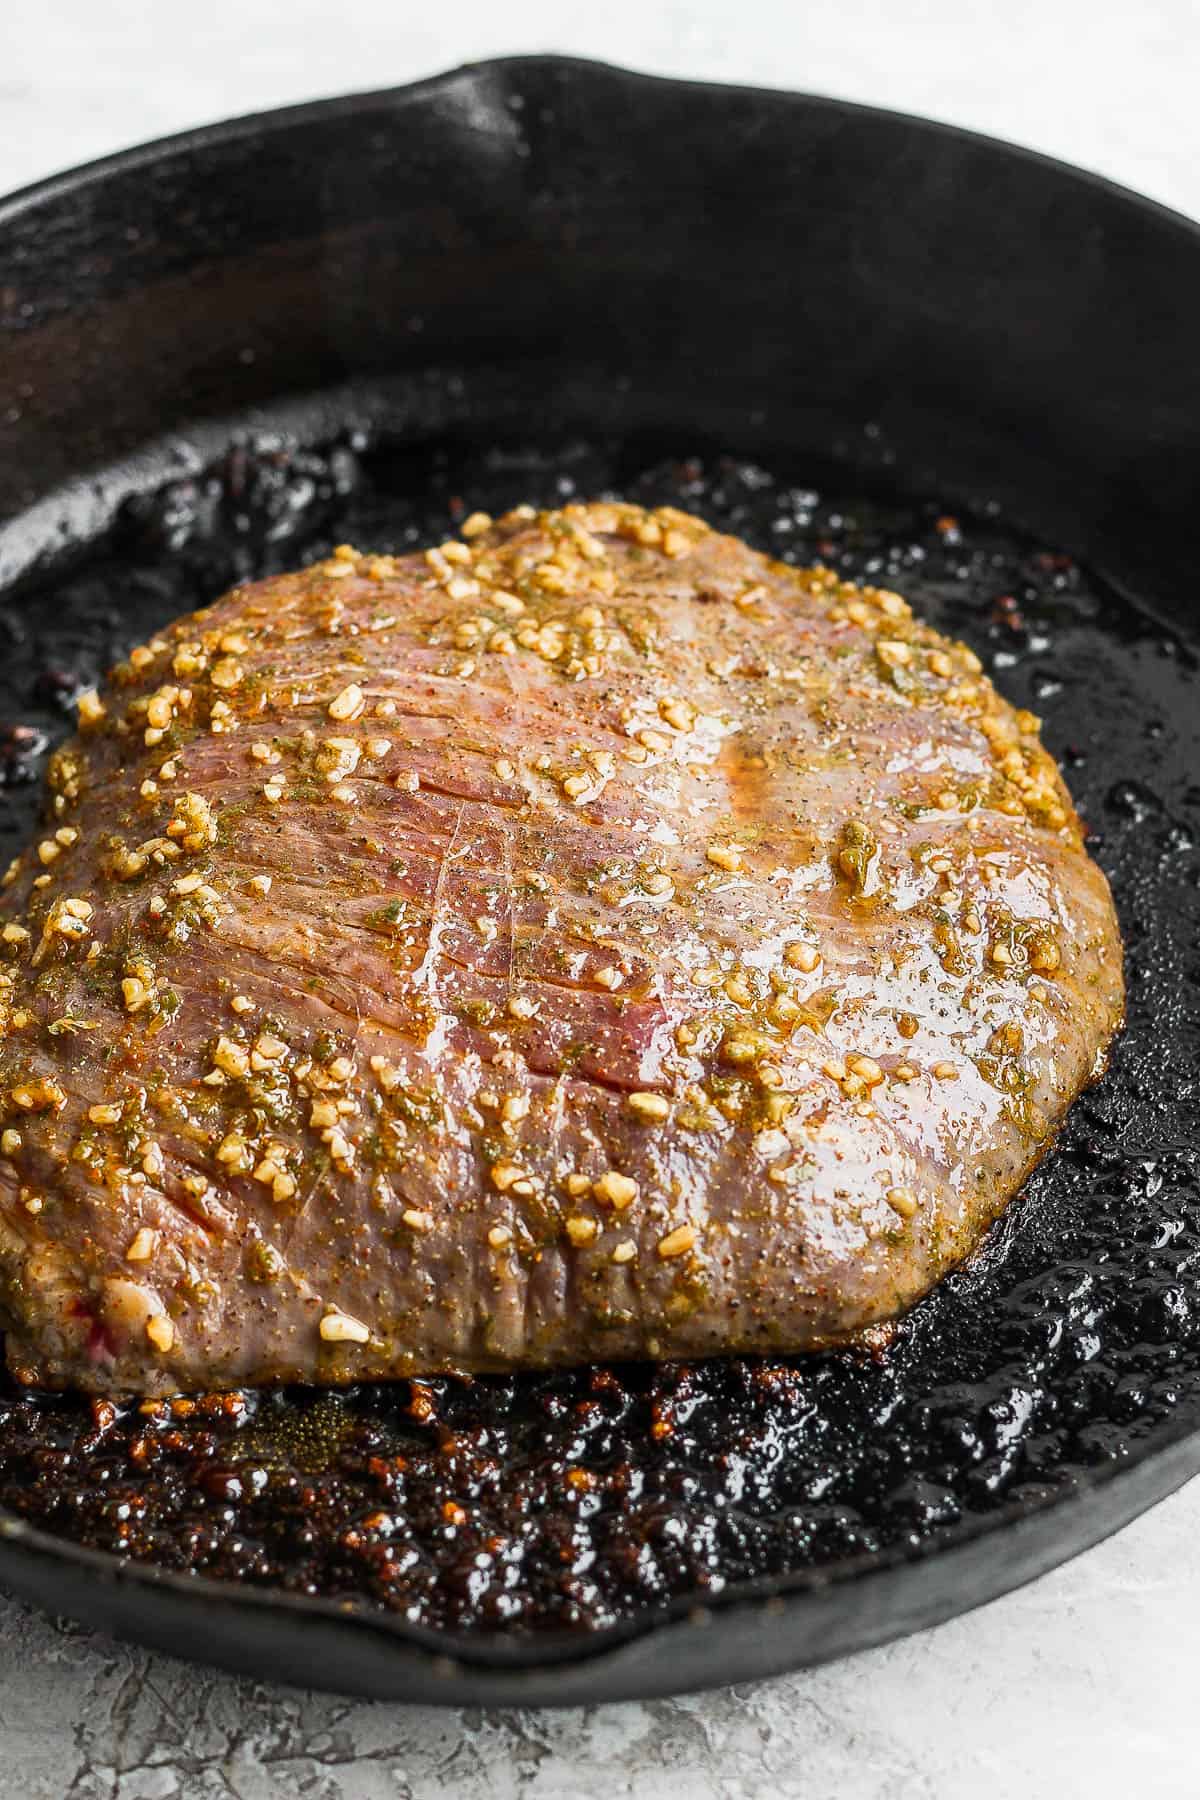 A partially cooked flank steak in a cast iron skillet.